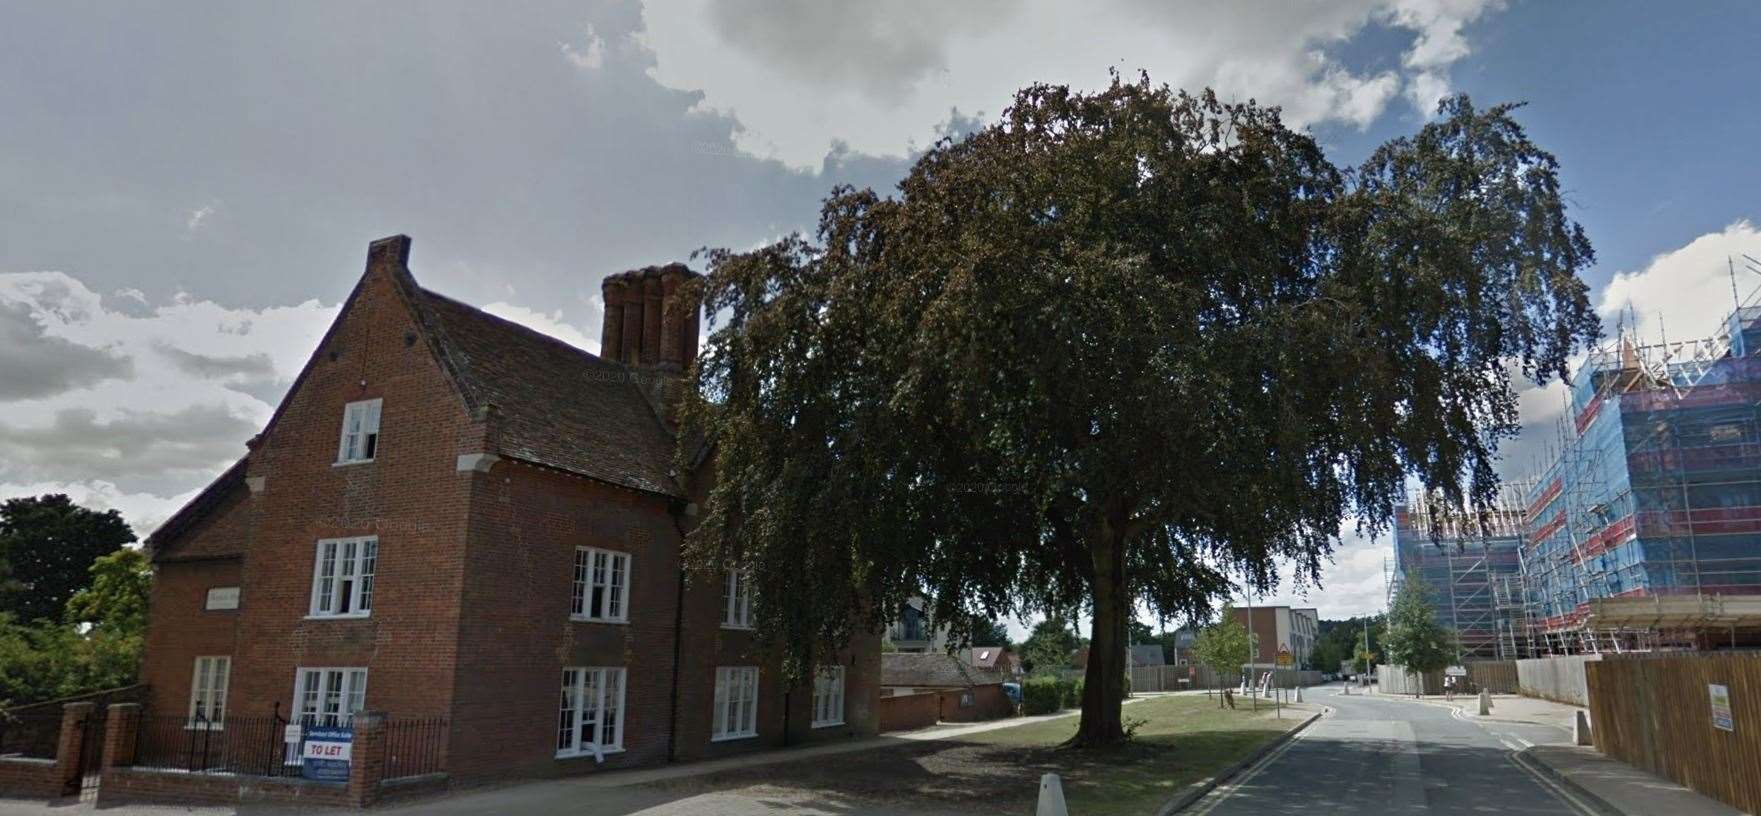 How the tree looks in the summer. Picture: Google Street View, 2018